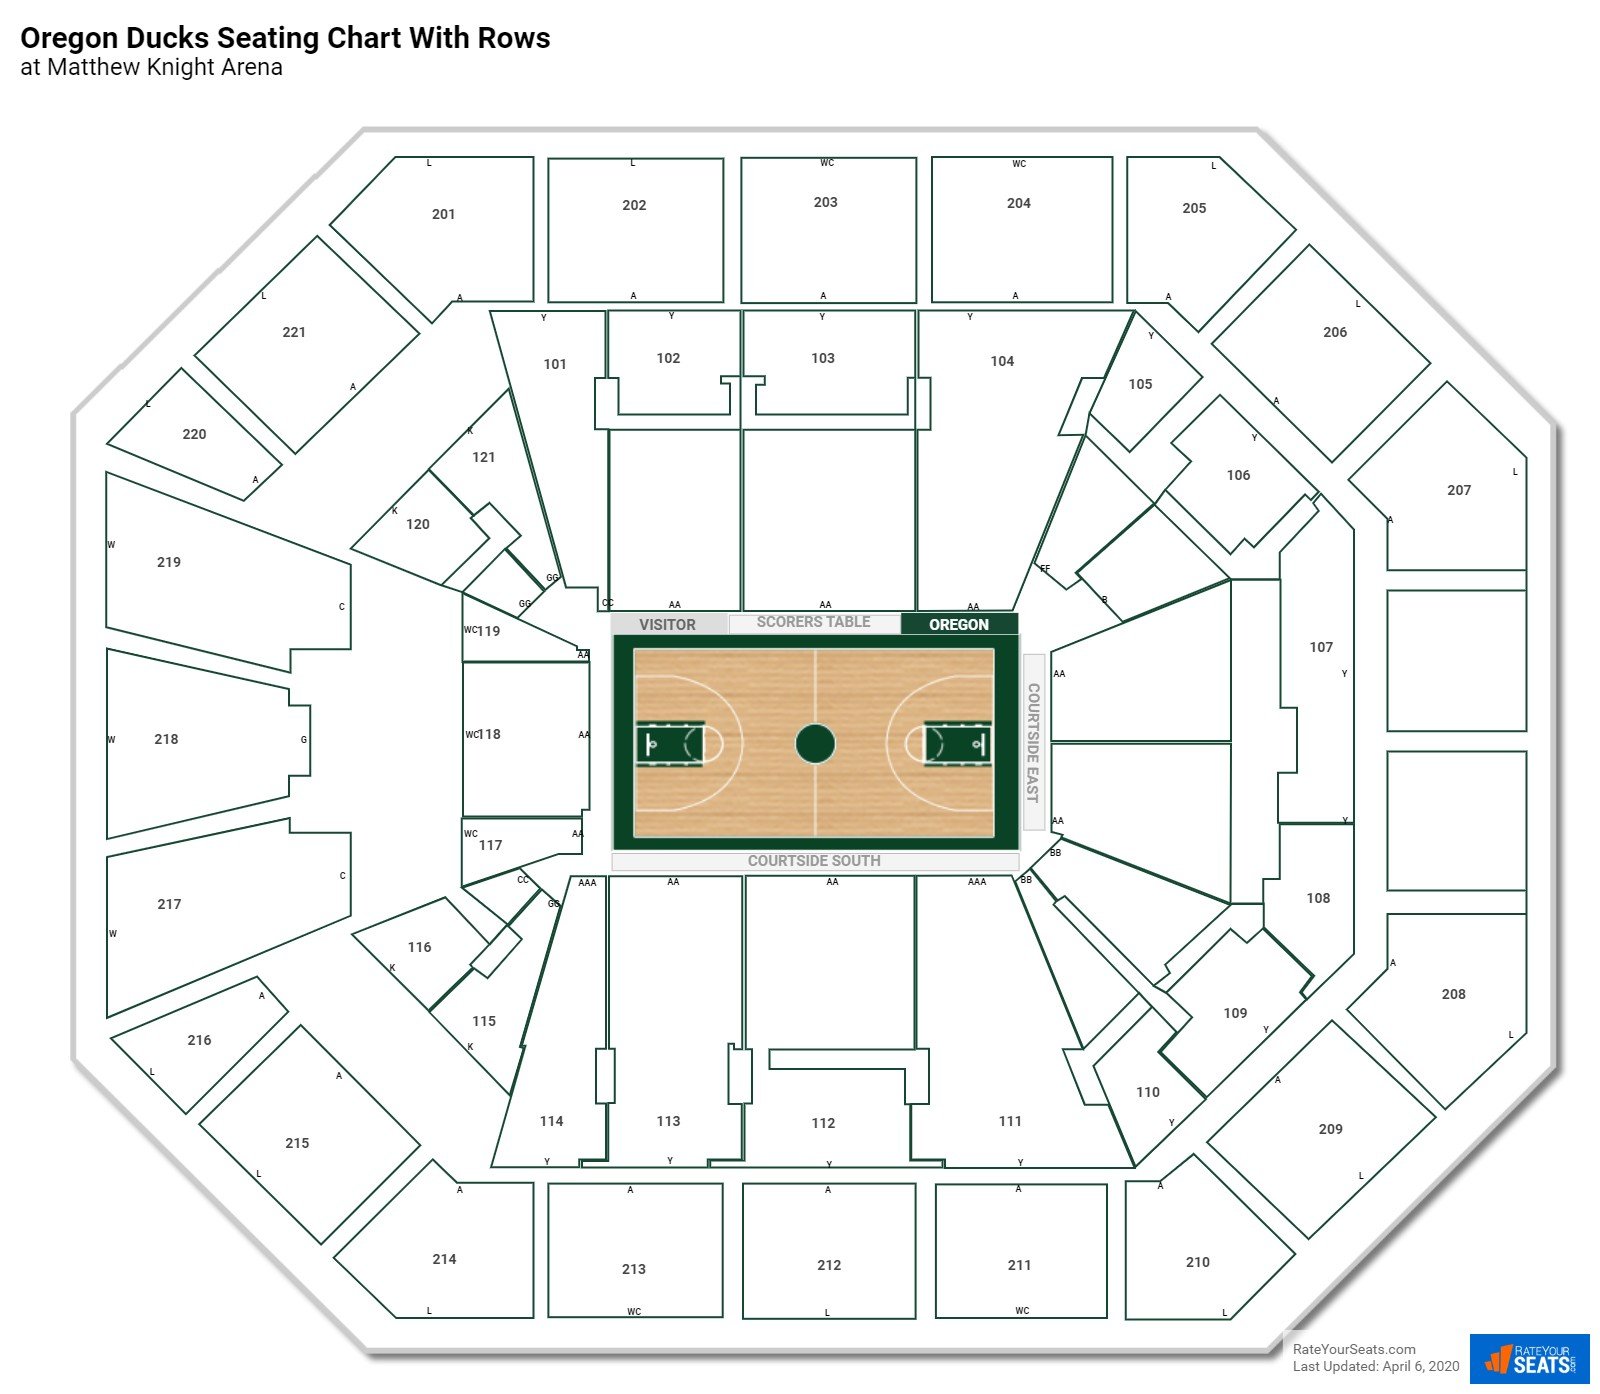 Matthew Knight Arena seating chart with row numbers